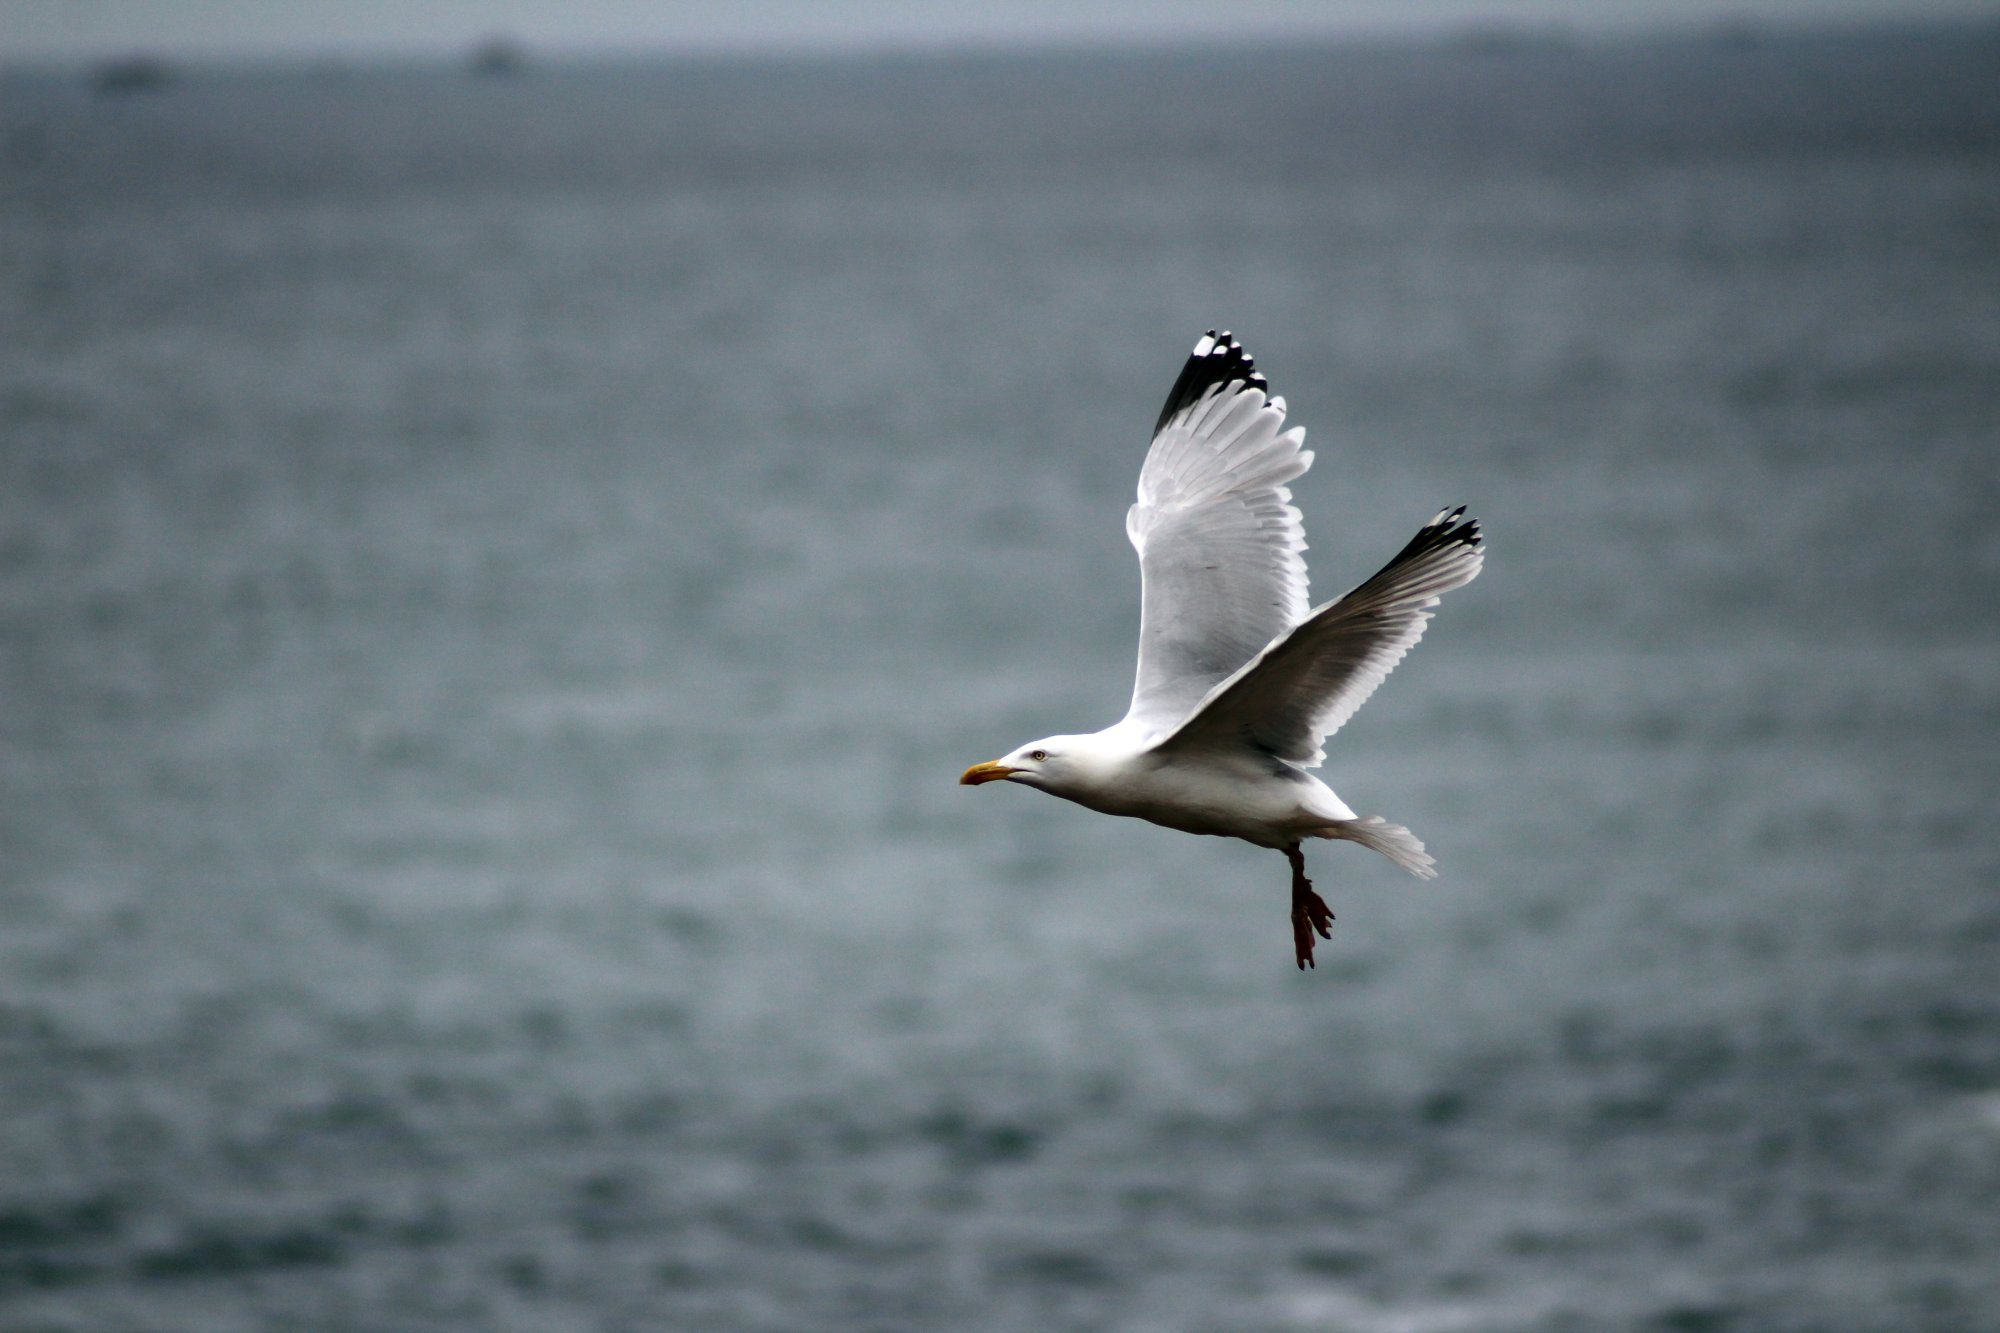 <a href="https://www.freepik.com/free-photo/seagull-flying-low-sea-level_8281384.htm#query=Great%20Black%20backed%20Gull&position=1&from_view=search&track=ais">Image by wirestock</a> on Freepik